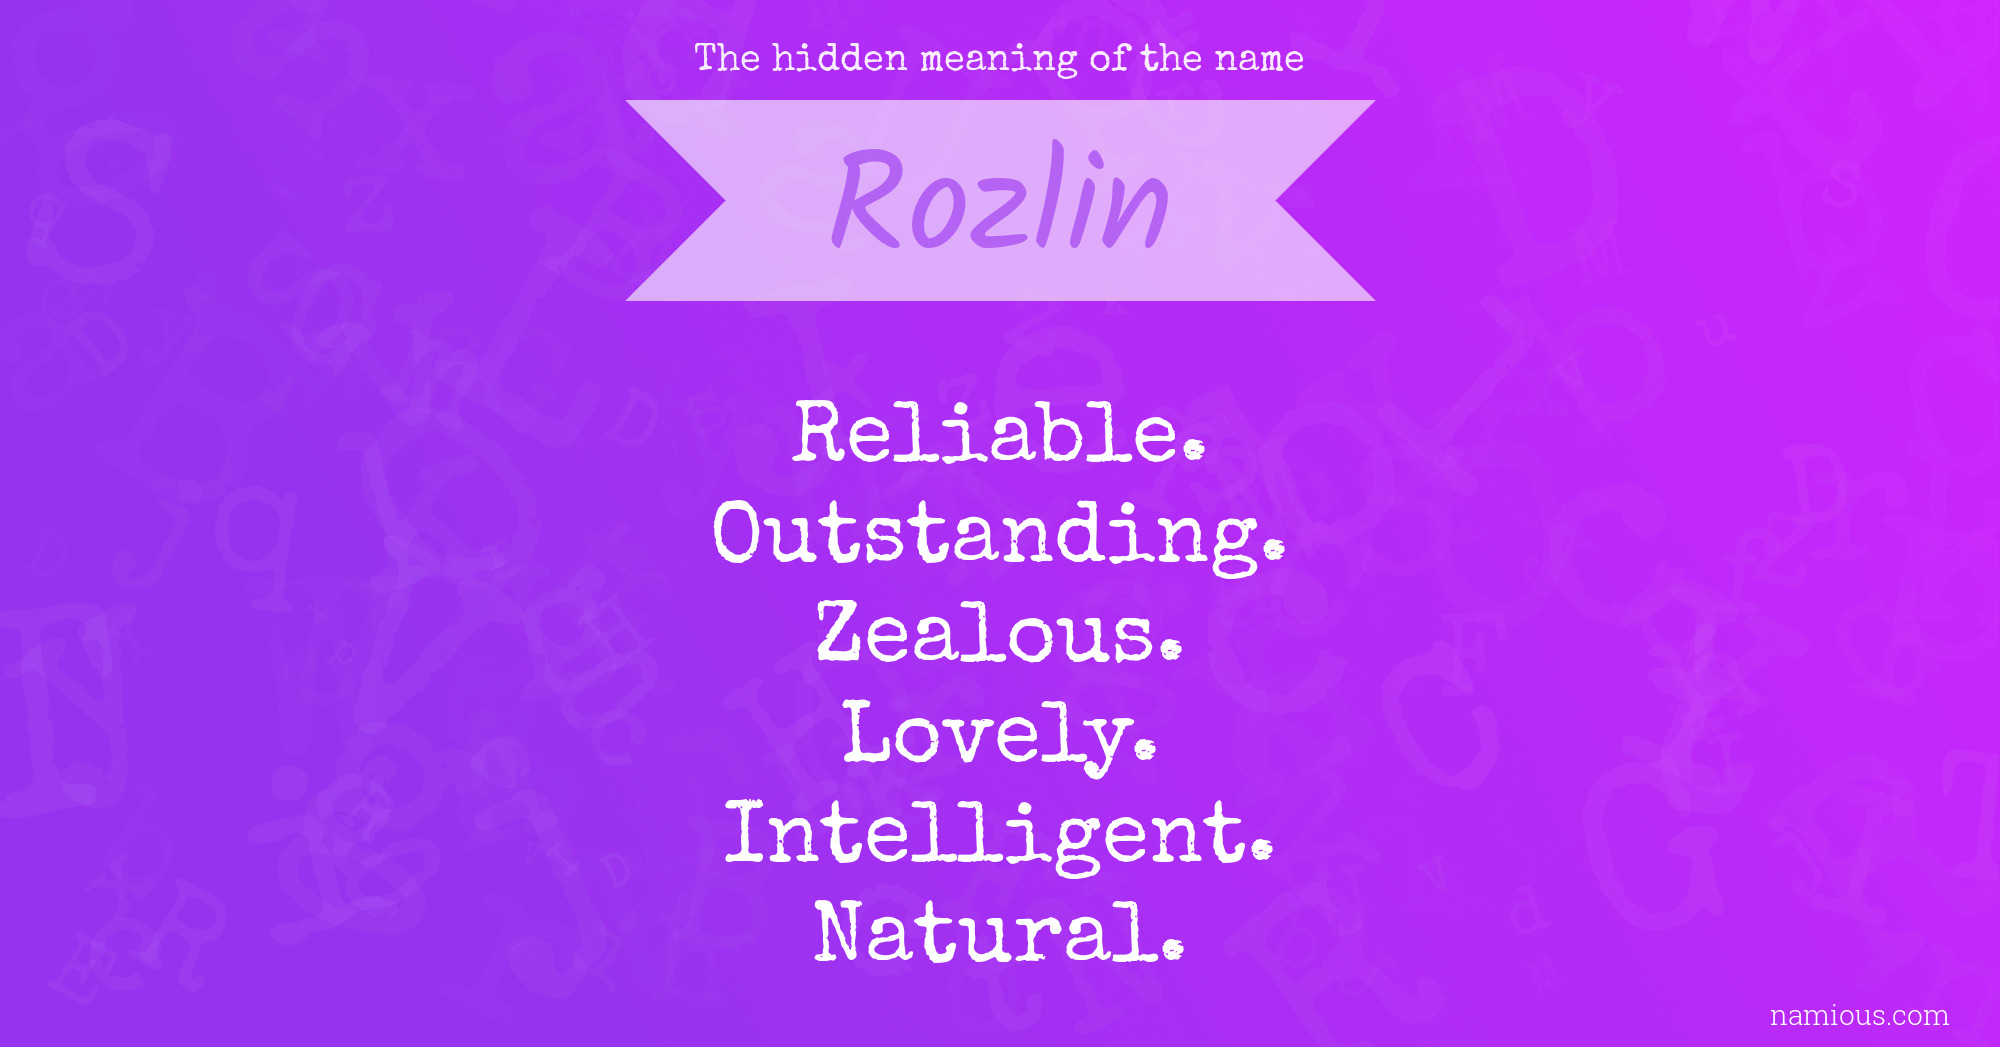 The hidden meaning of the name Rozlin